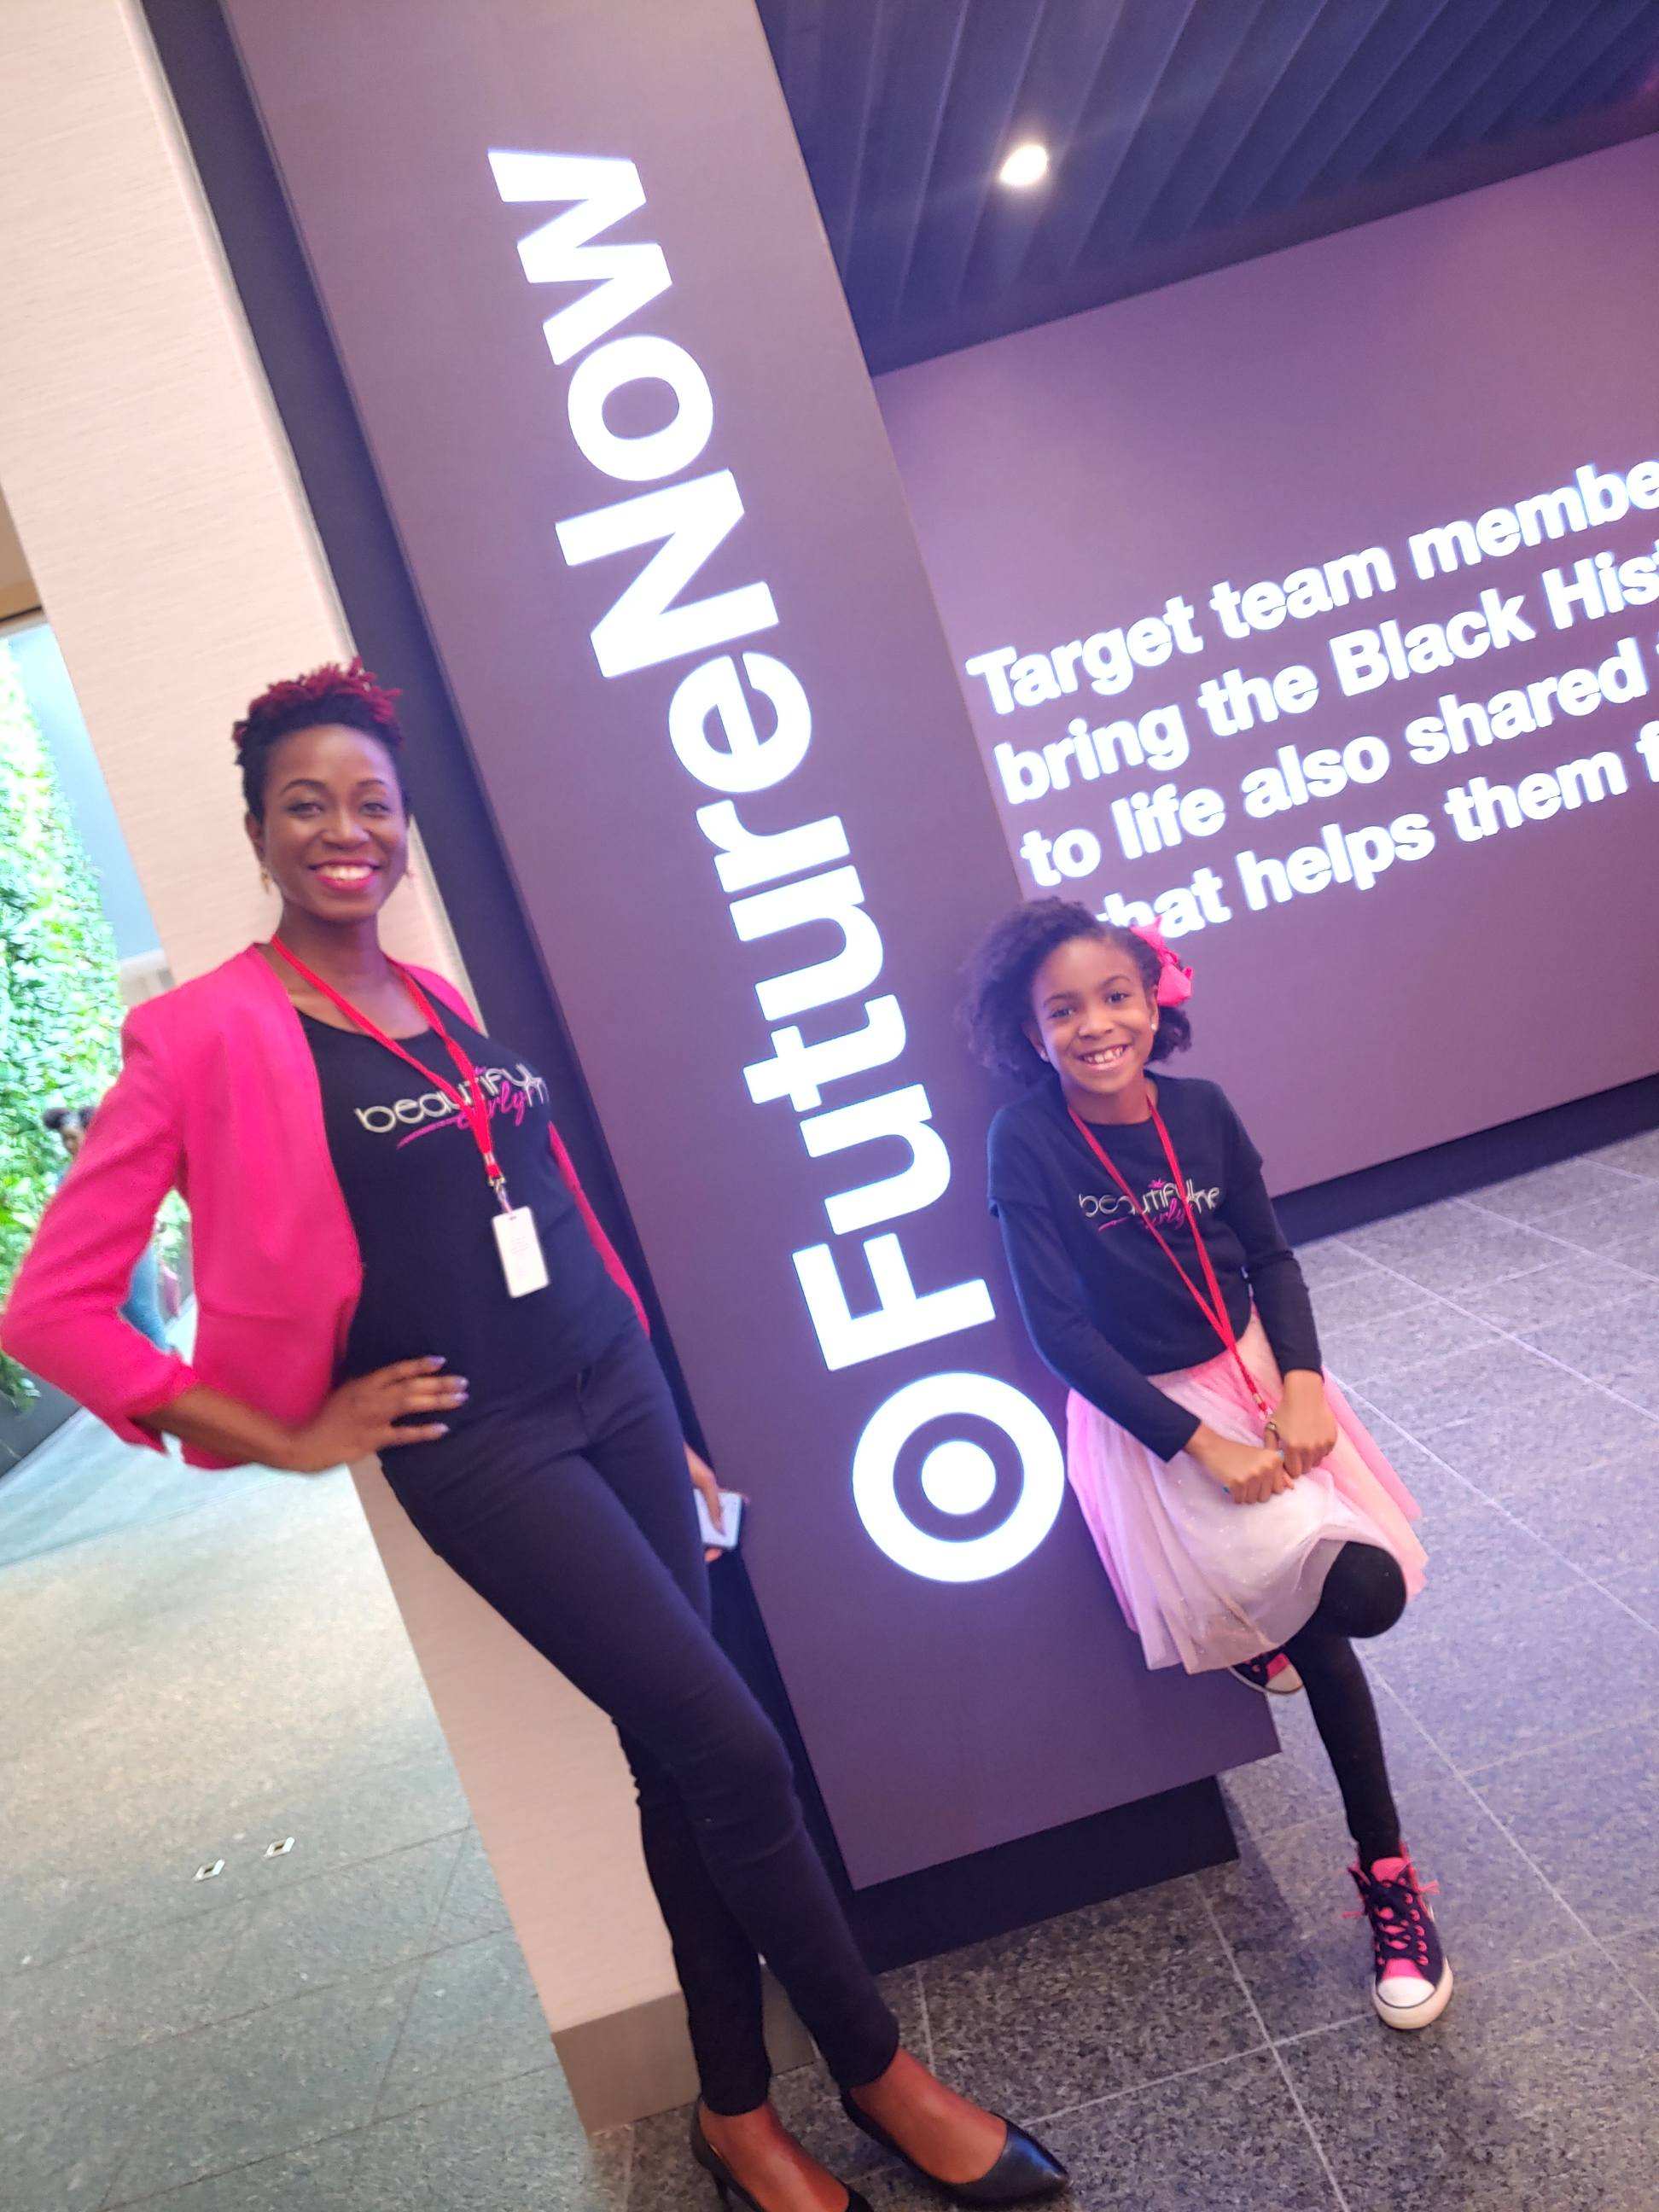 8 year old CEO Zoe and her Mom at the Target HQ Feb 2020